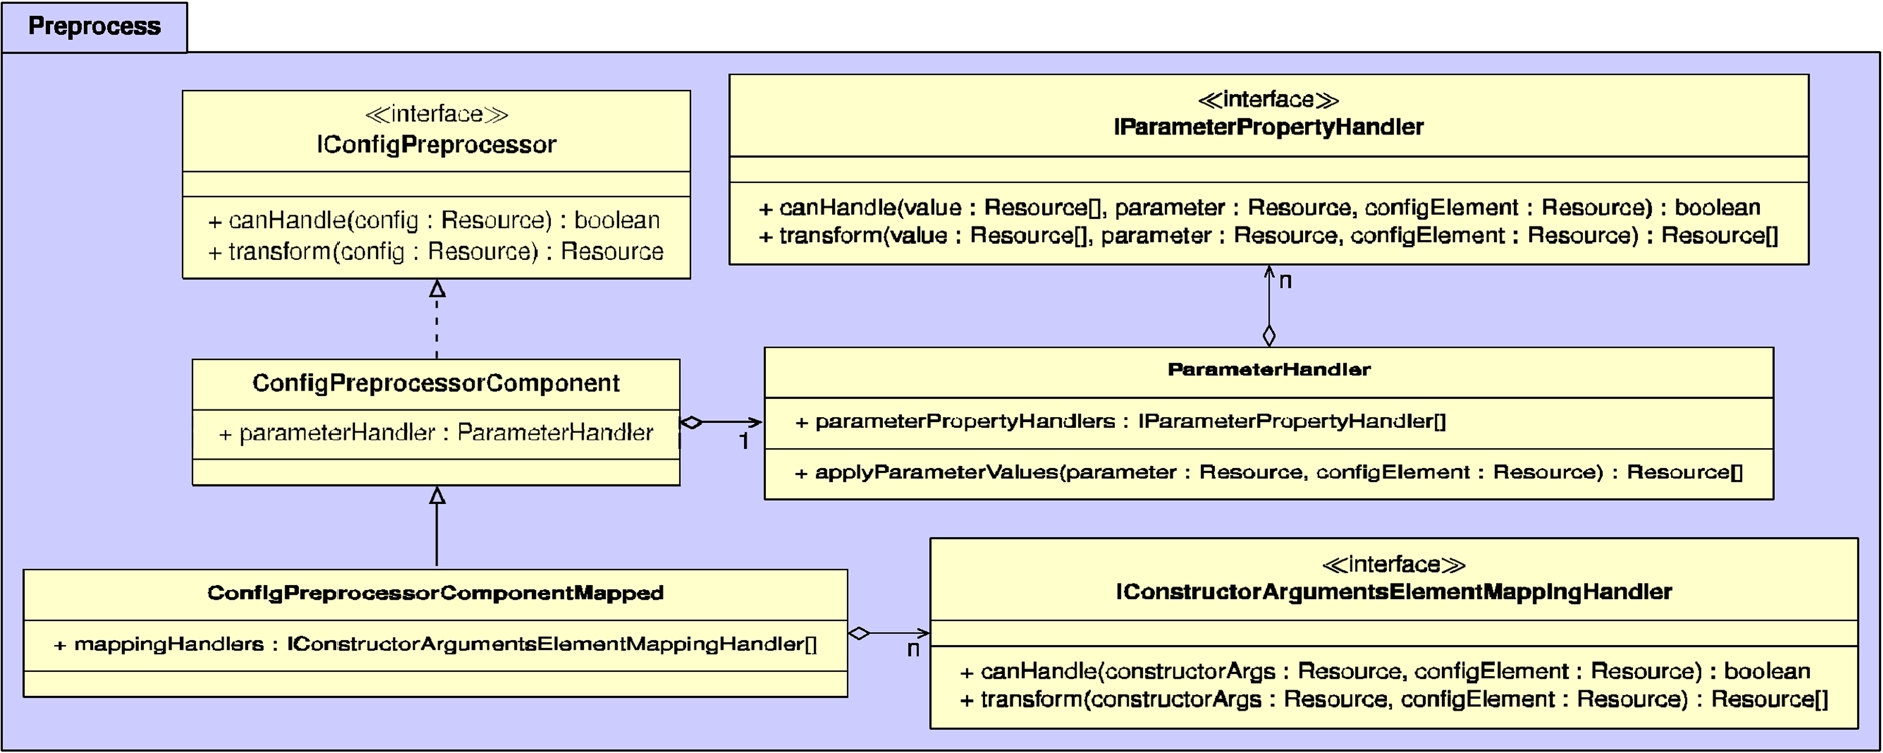 UML diagram of the classes within the preprocess package, which are responsible for preprocessing config parameters and constructor arguments.